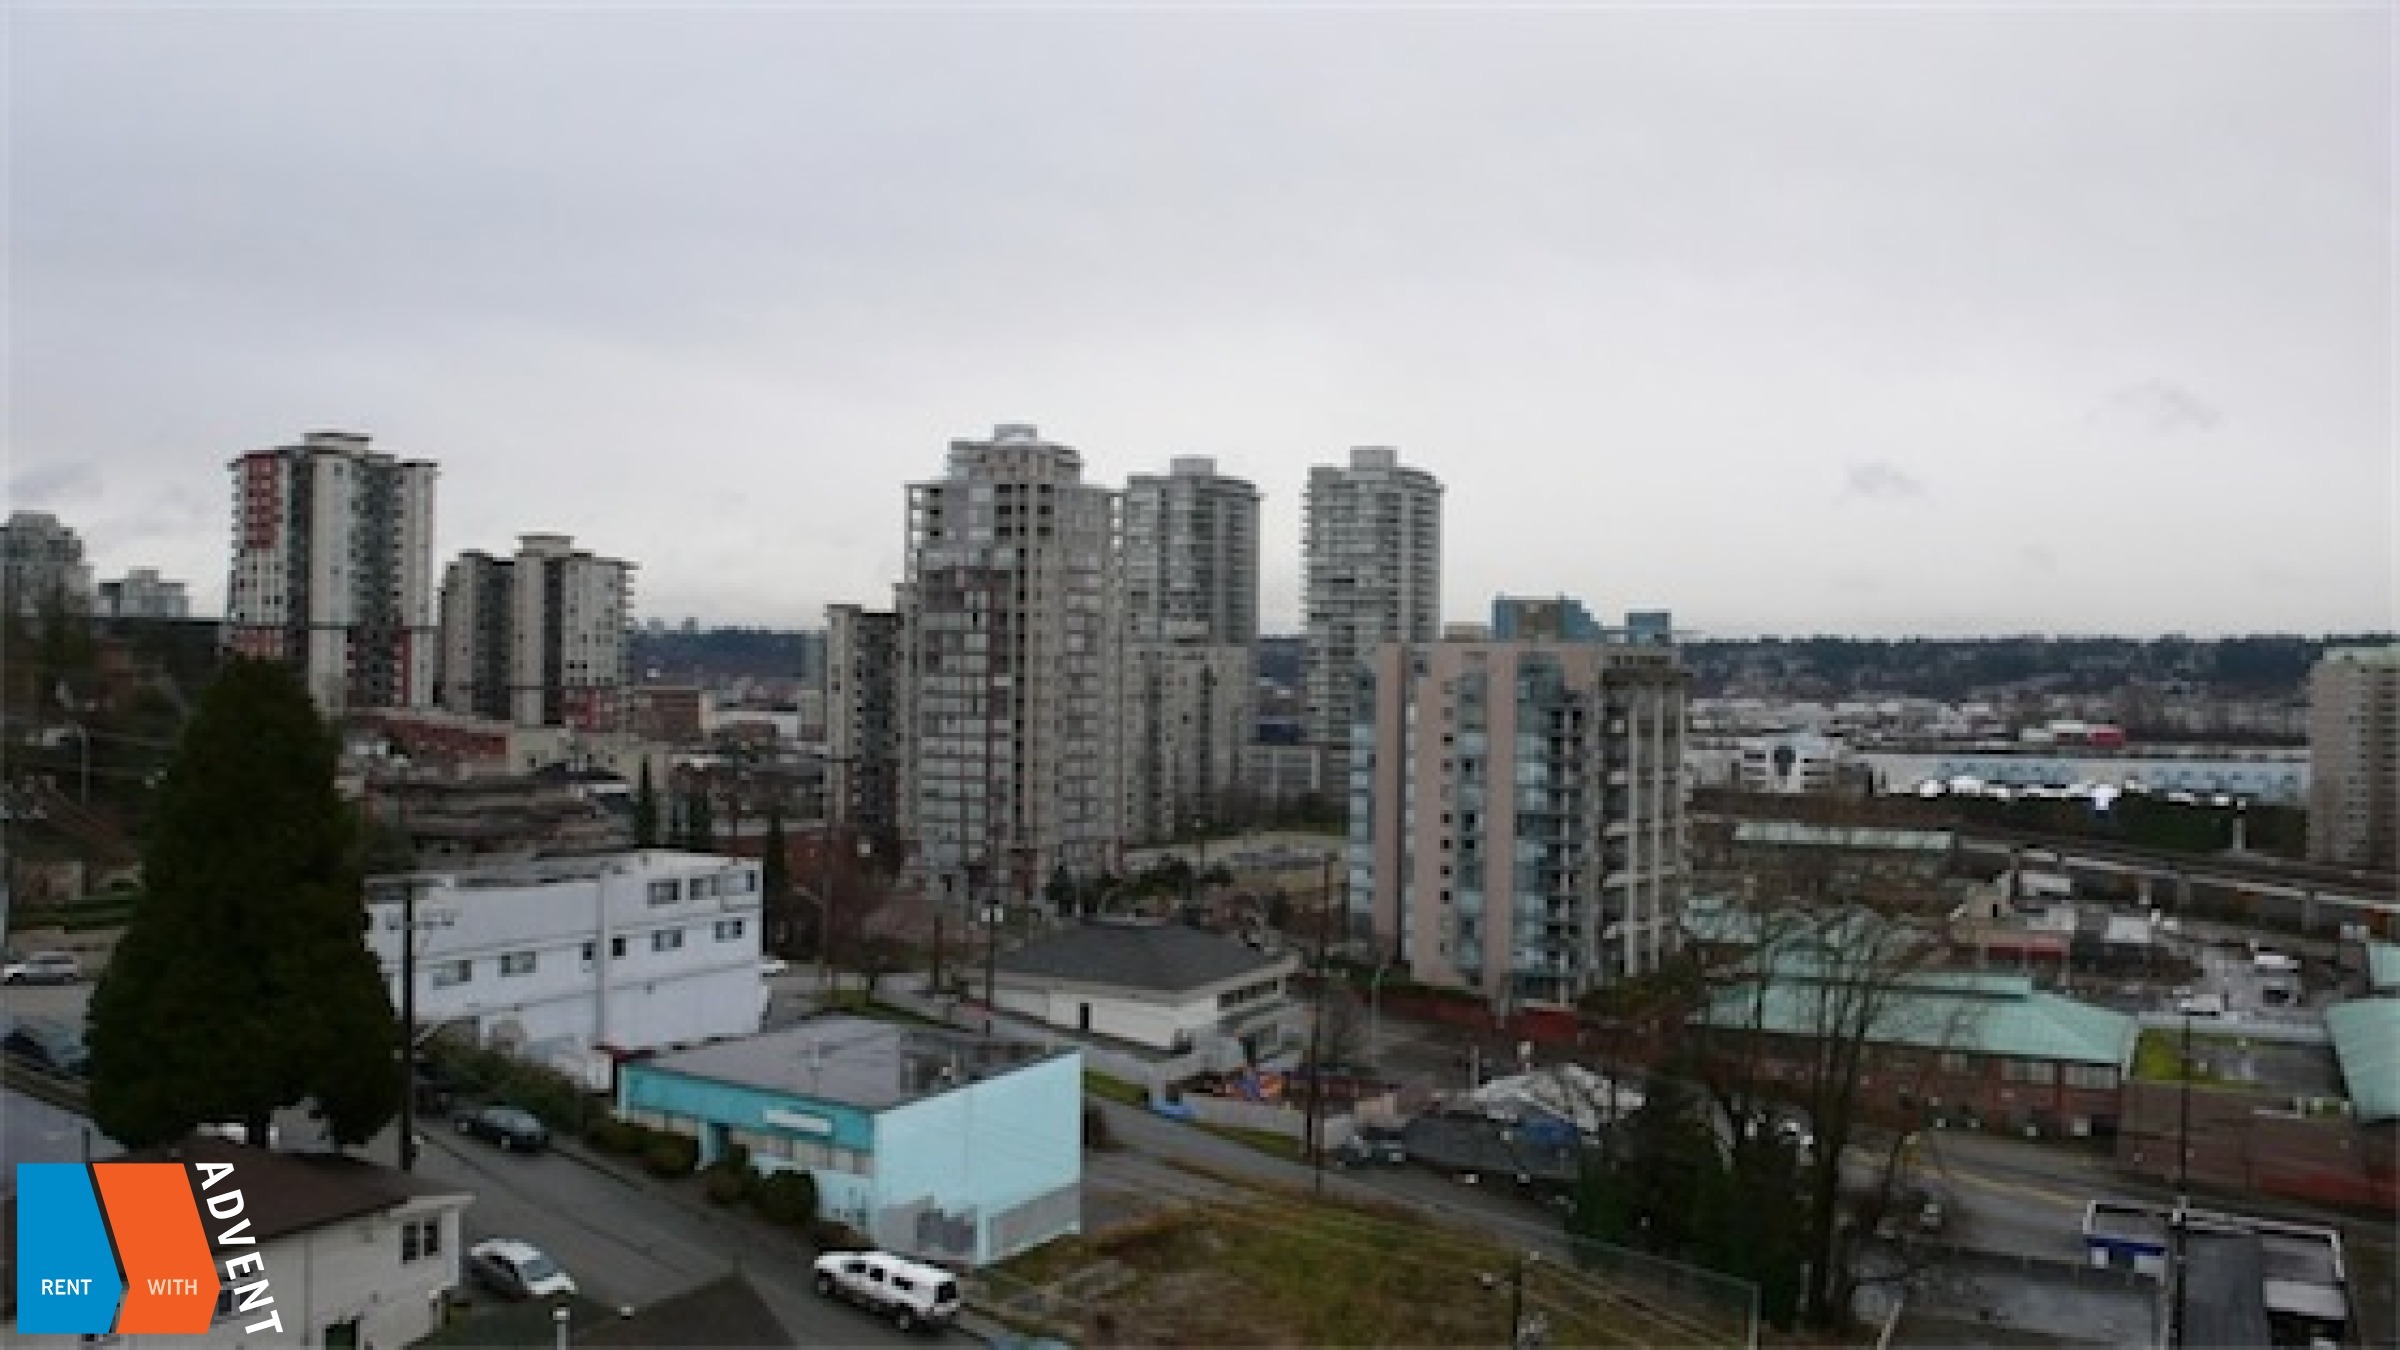 Amara Terrace 1 Bedroom Apartment For Rent in Uptown New Westminster. 806 - 1026 Queens Avenue, New Westminster, BC, Canada.